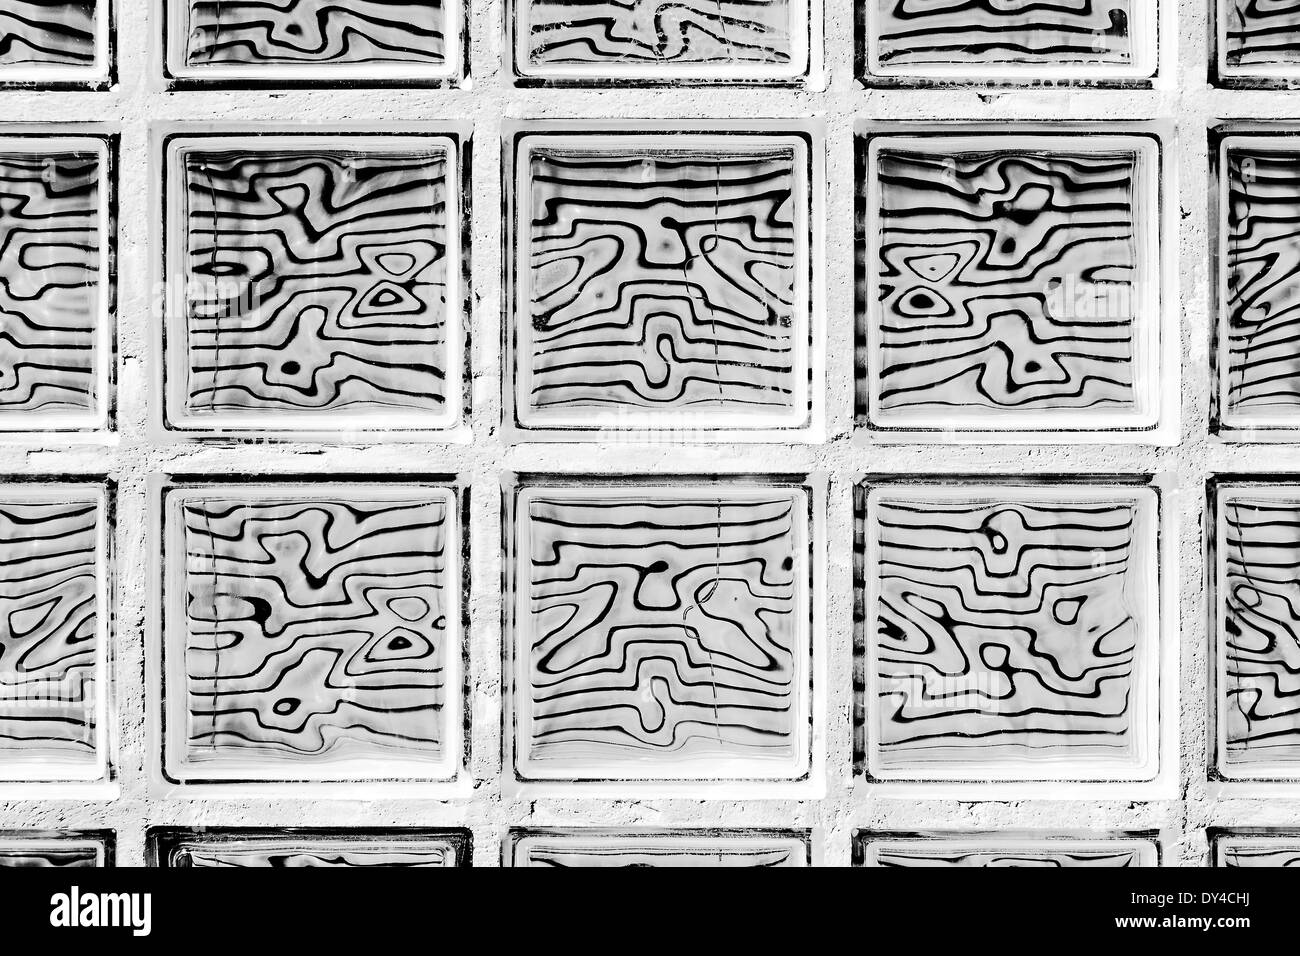 Pattern of square glass block with abstract shapes Stock Photo